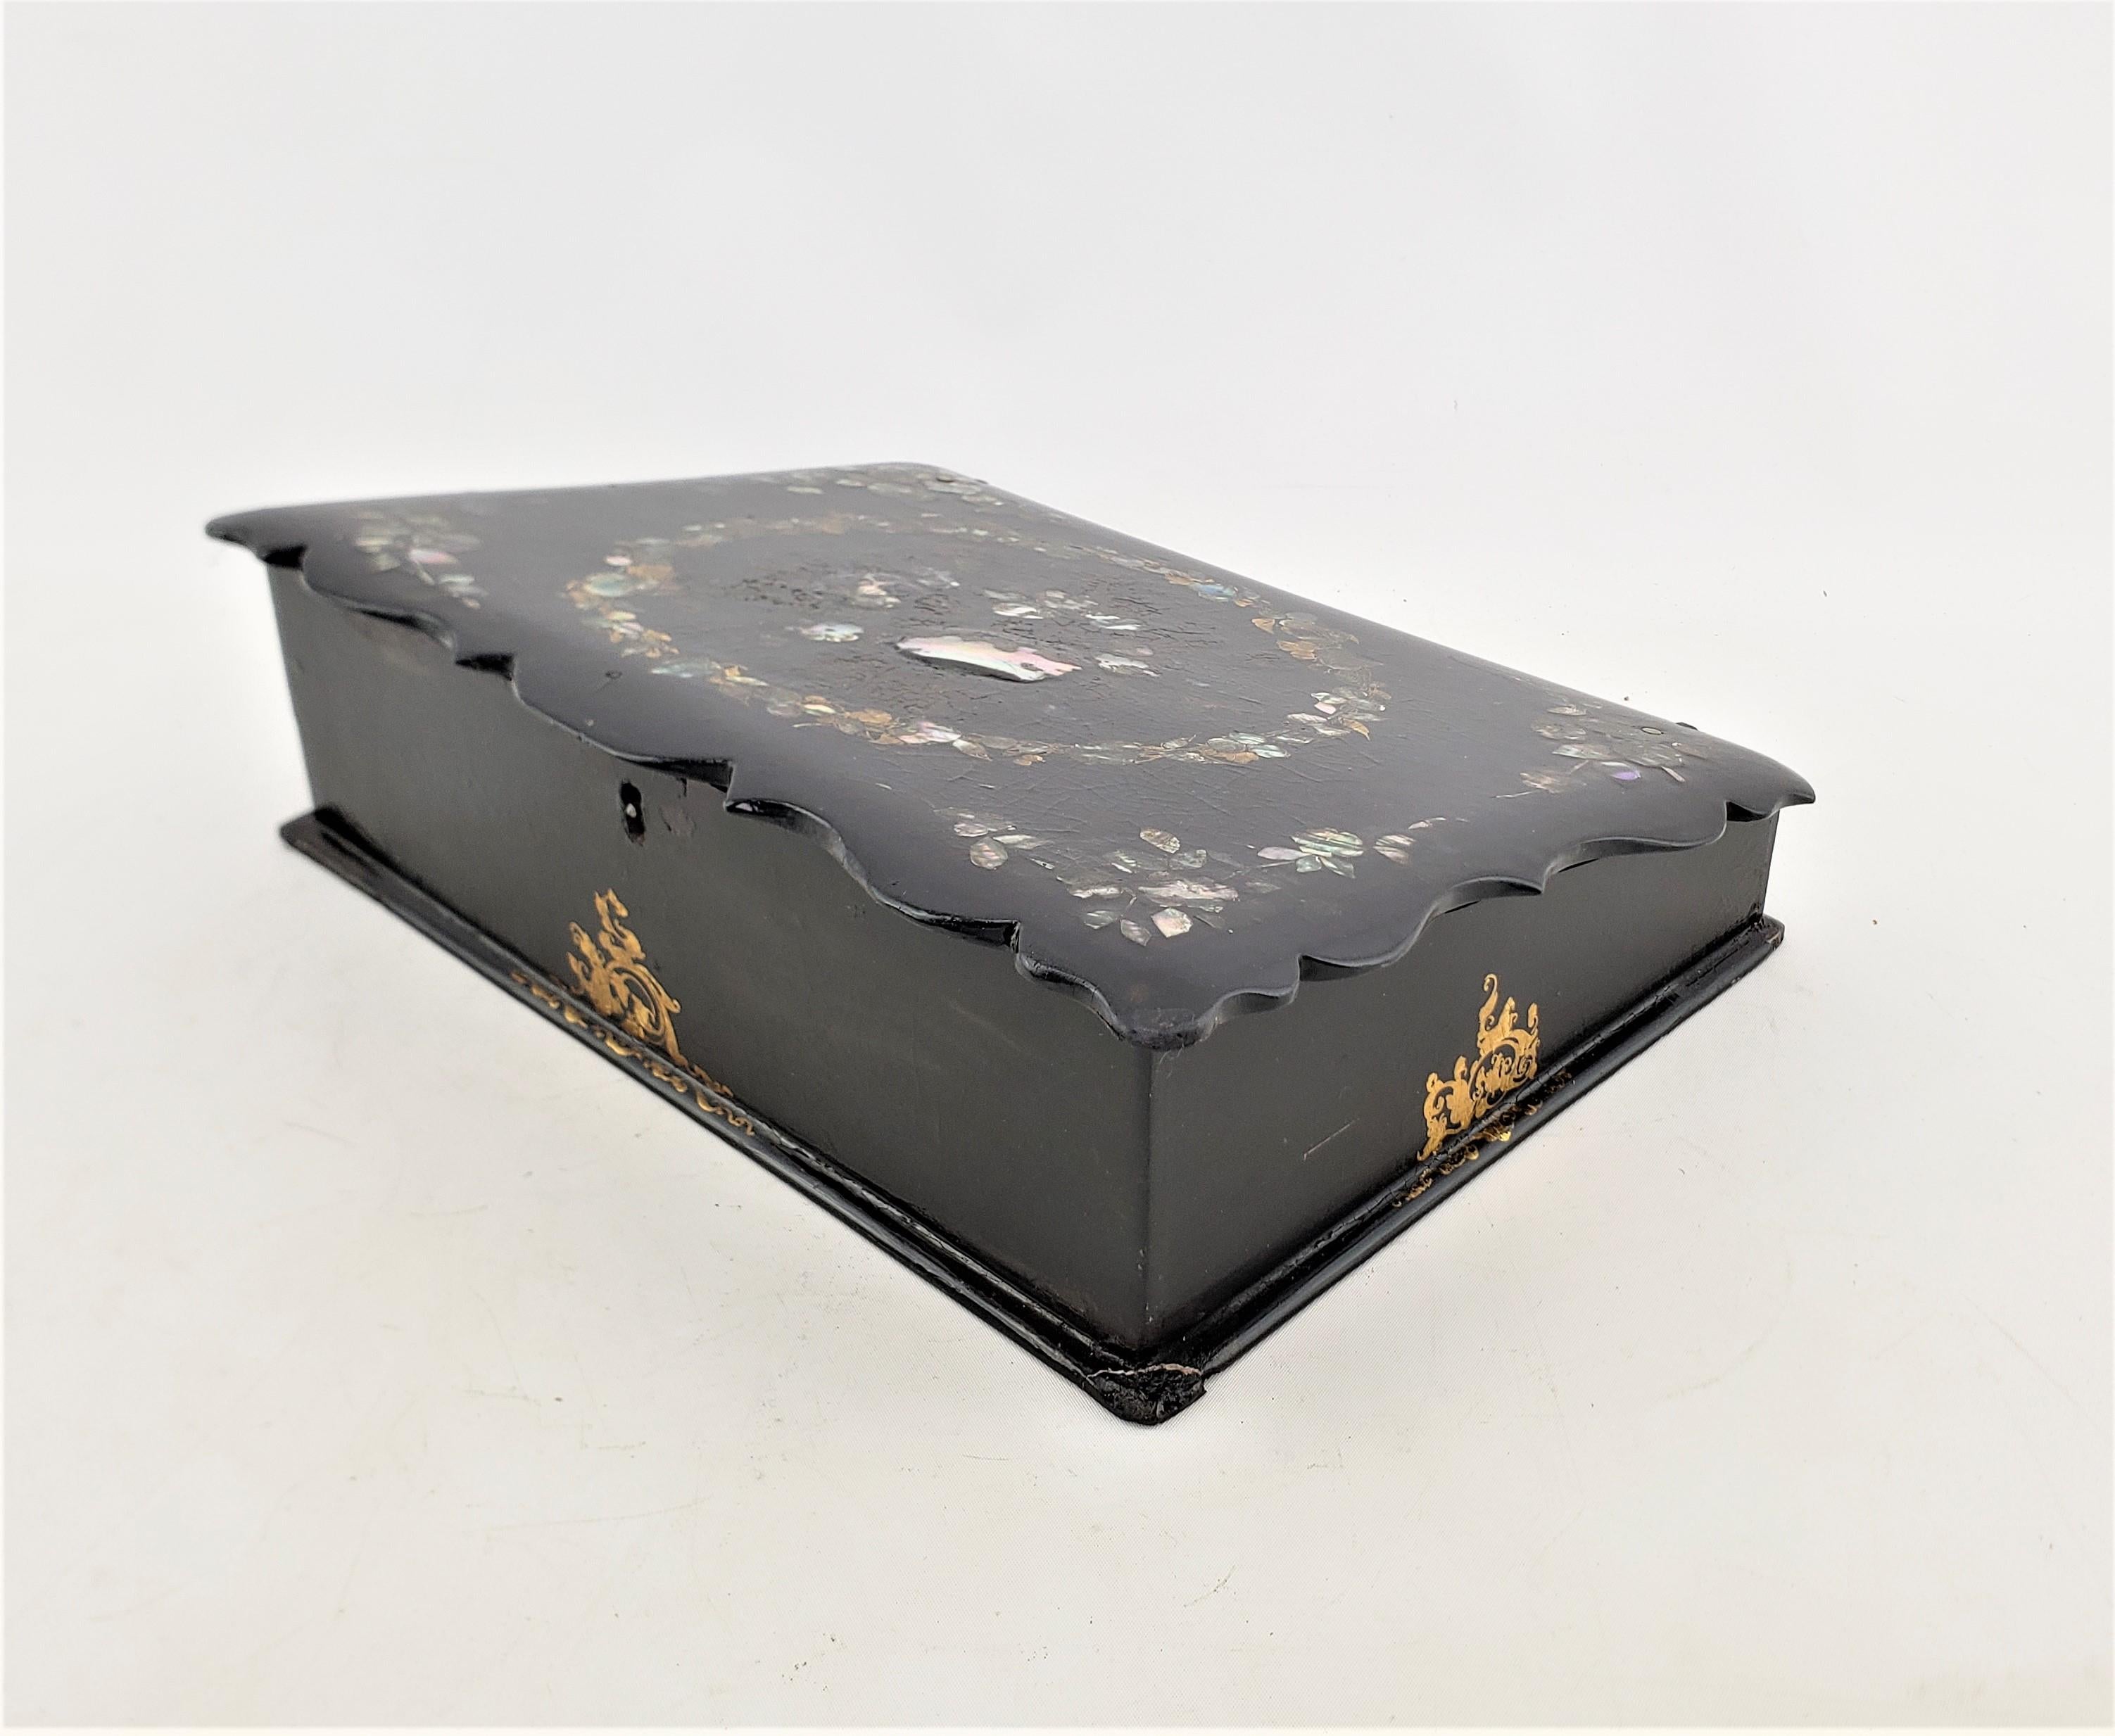 Antique English Paper Mache Ladies Writing Box or Lap Desk with Japanned Finish In Good Condition For Sale In Hamilton, Ontario